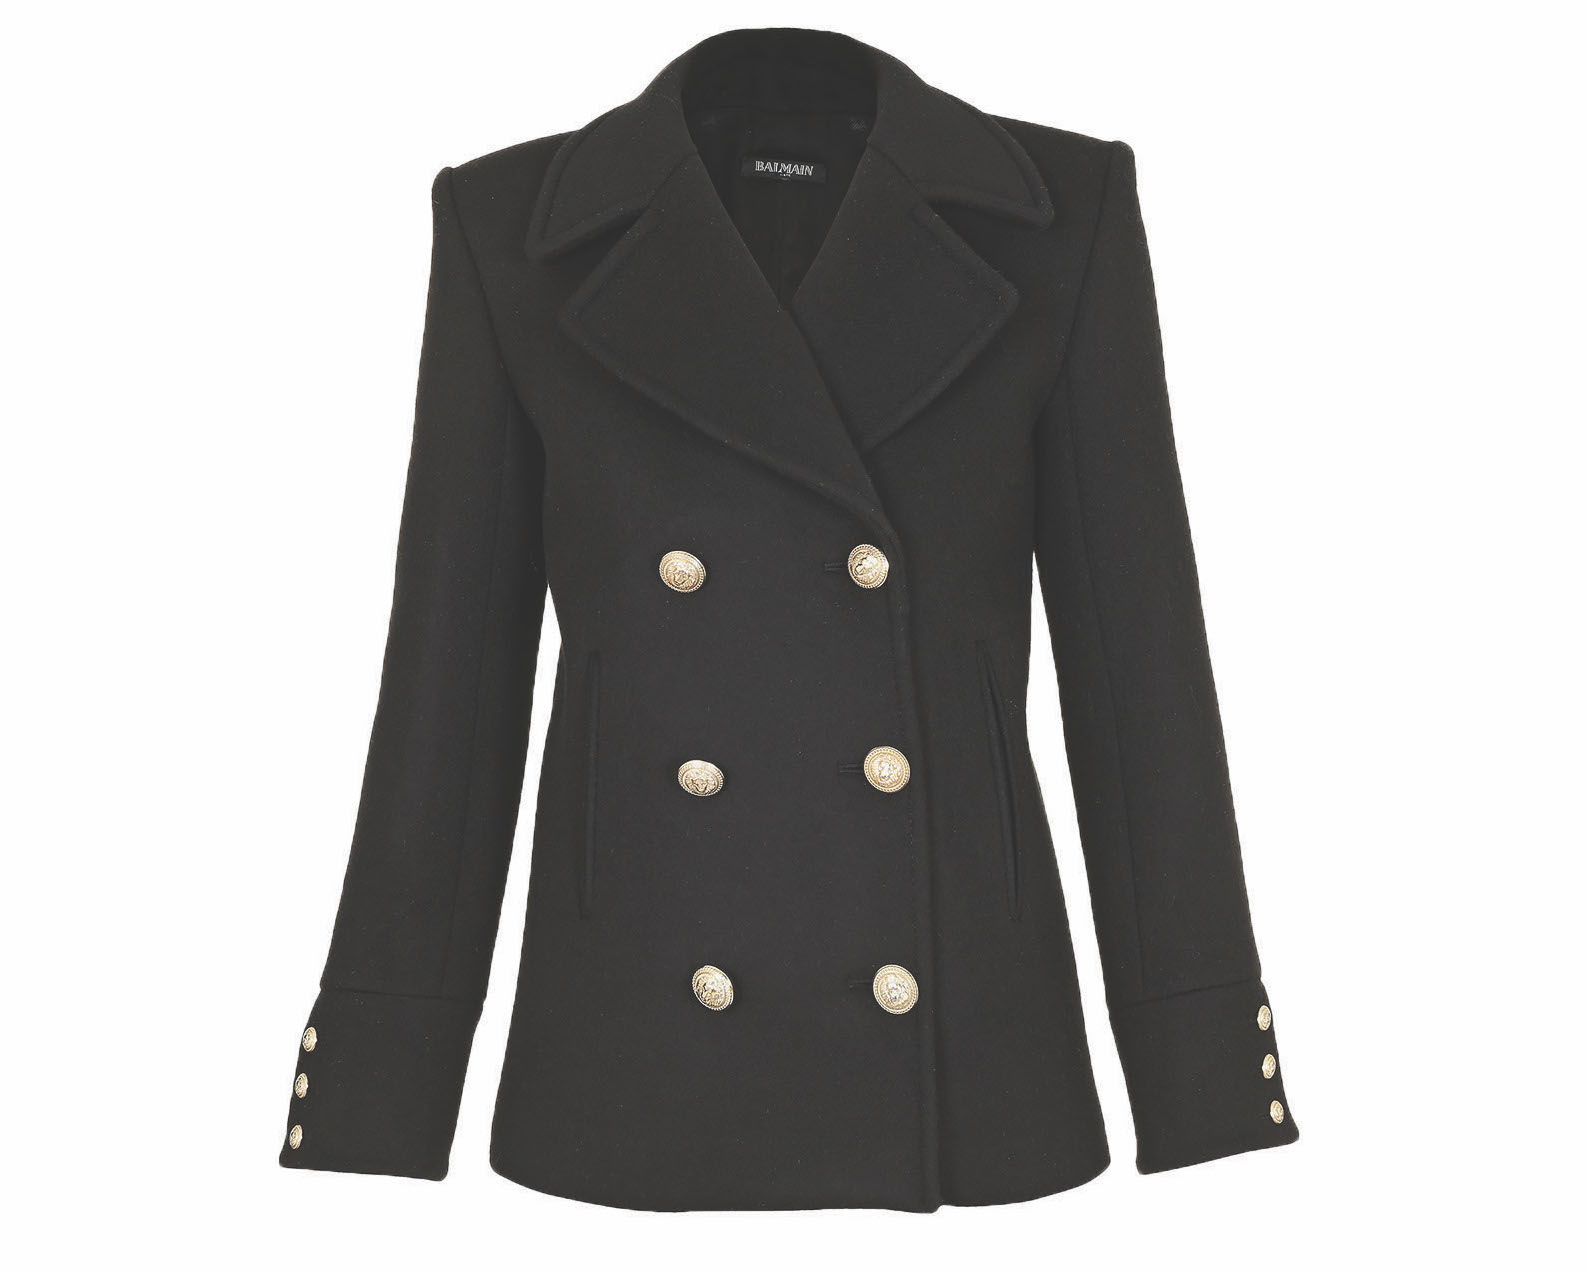 Balmain double-breasted wool and cashmere coat